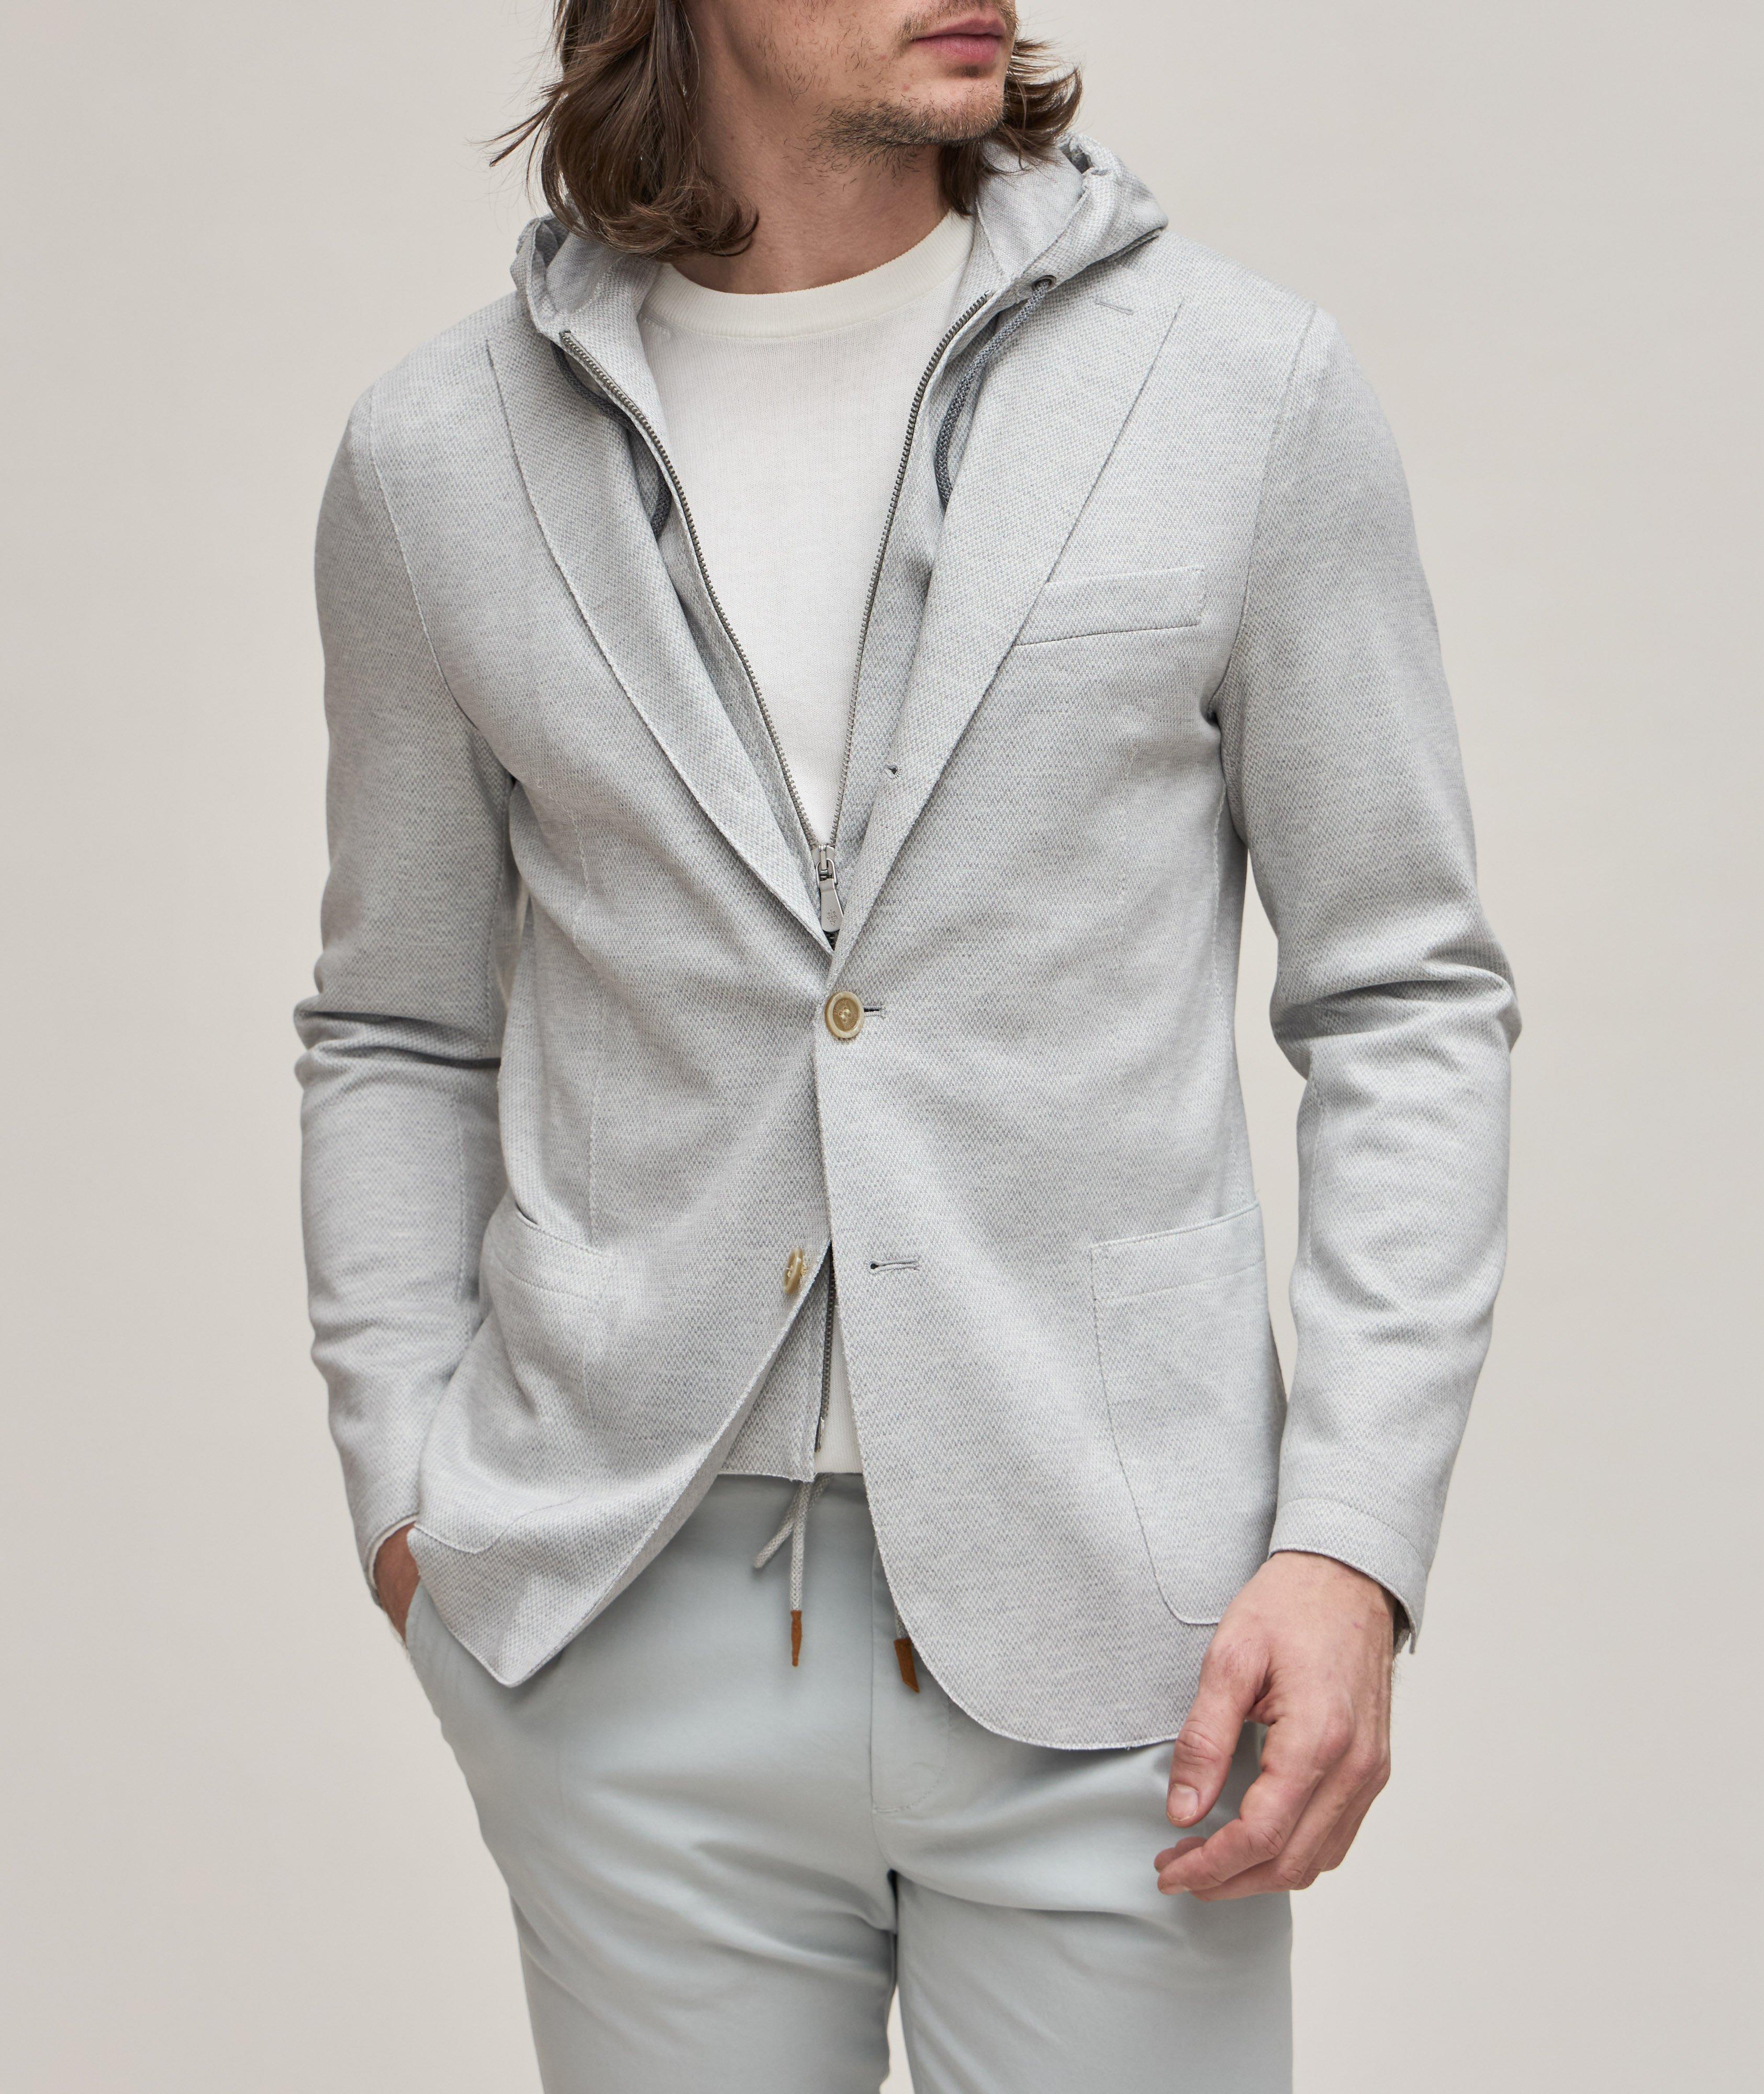 Removable Insert Technical Fabric Sport Jacket image 1